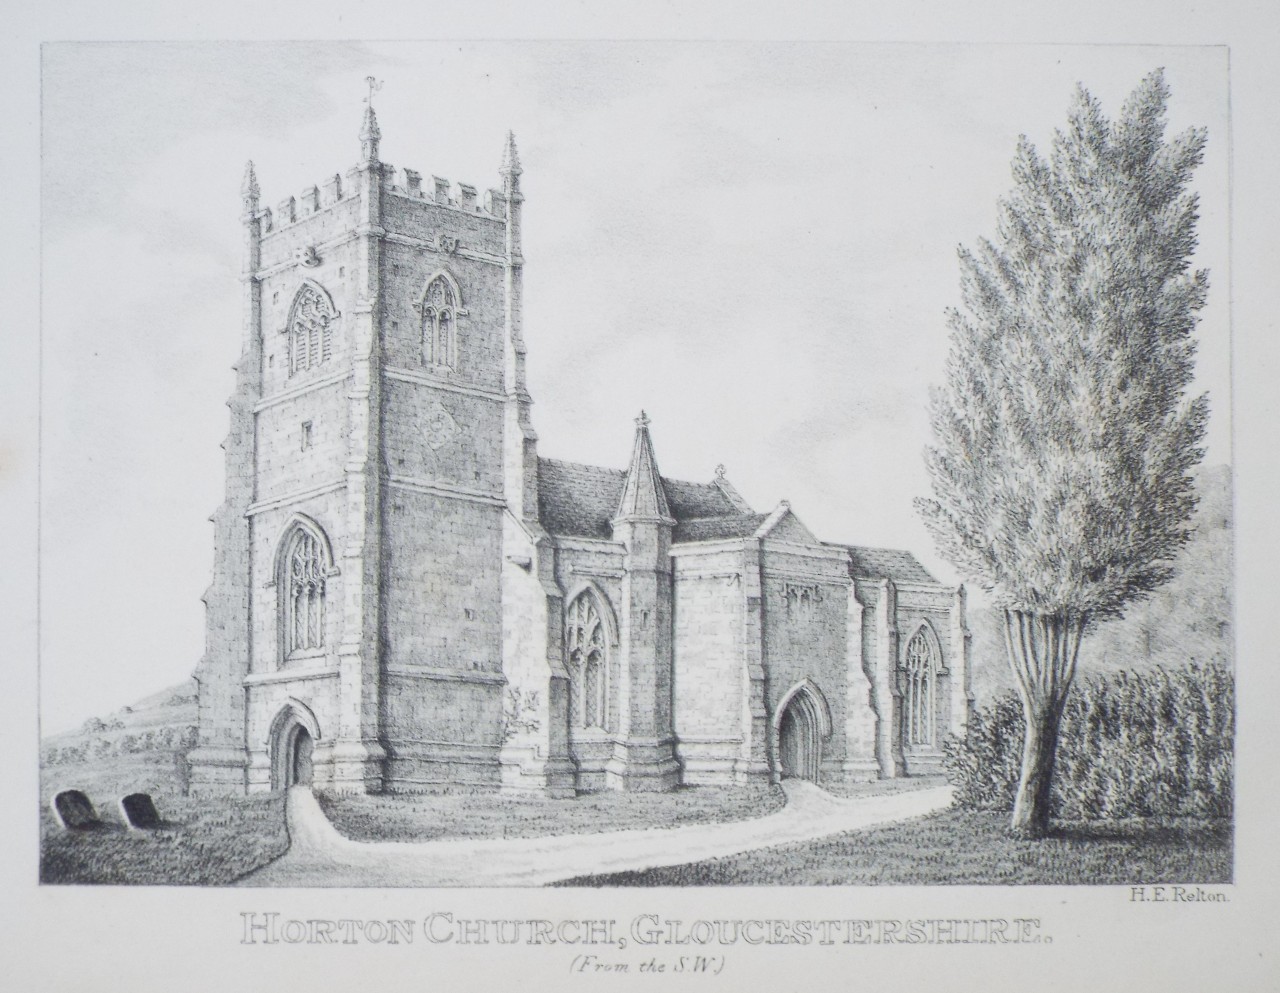 Zinc Lithograph - Horton Church, Gloucestershire. (From the S.W.) - Relton